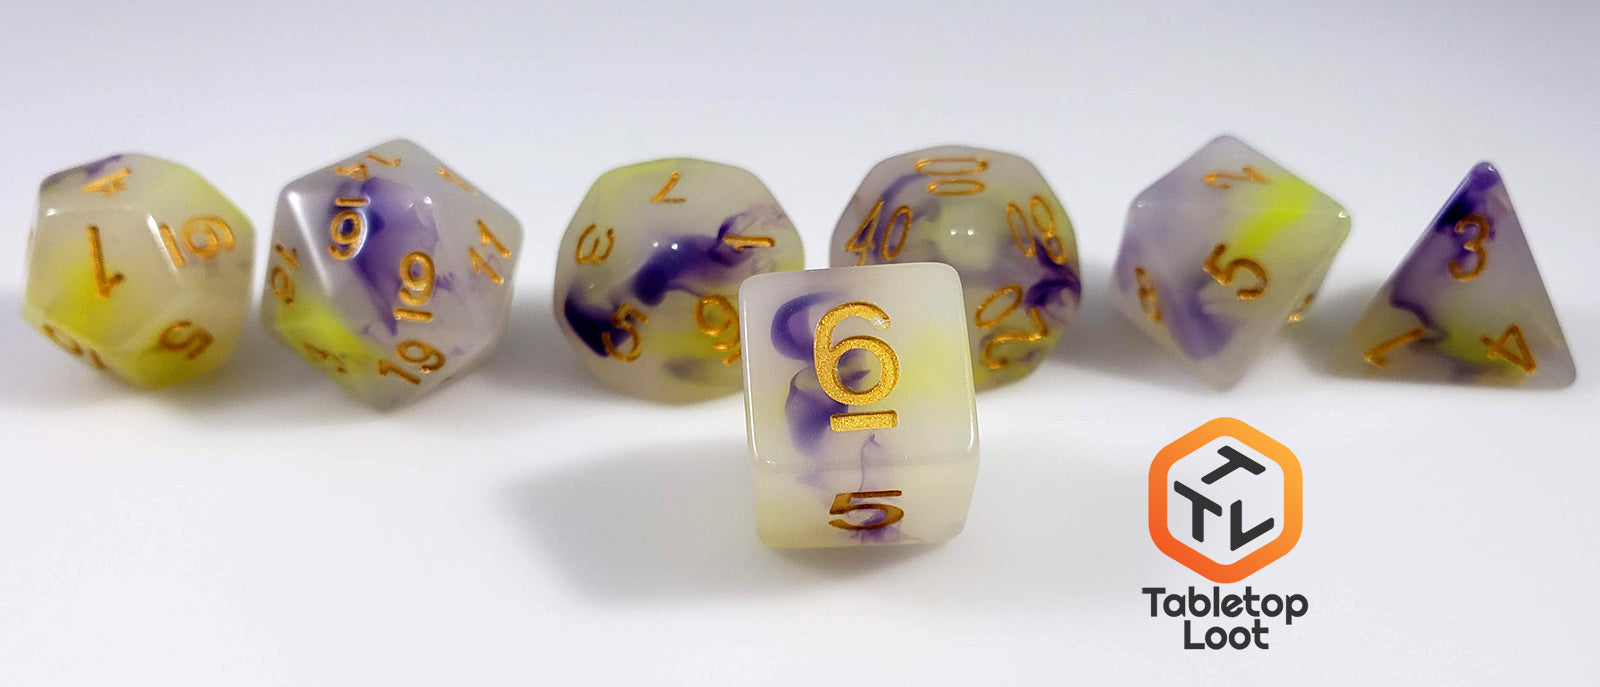 A close up of the D6 from the Fields of Wildflowers 7 piece dice set from Tabletop Loot with swirls of purple and yellow in a milky resin and gold numbering.